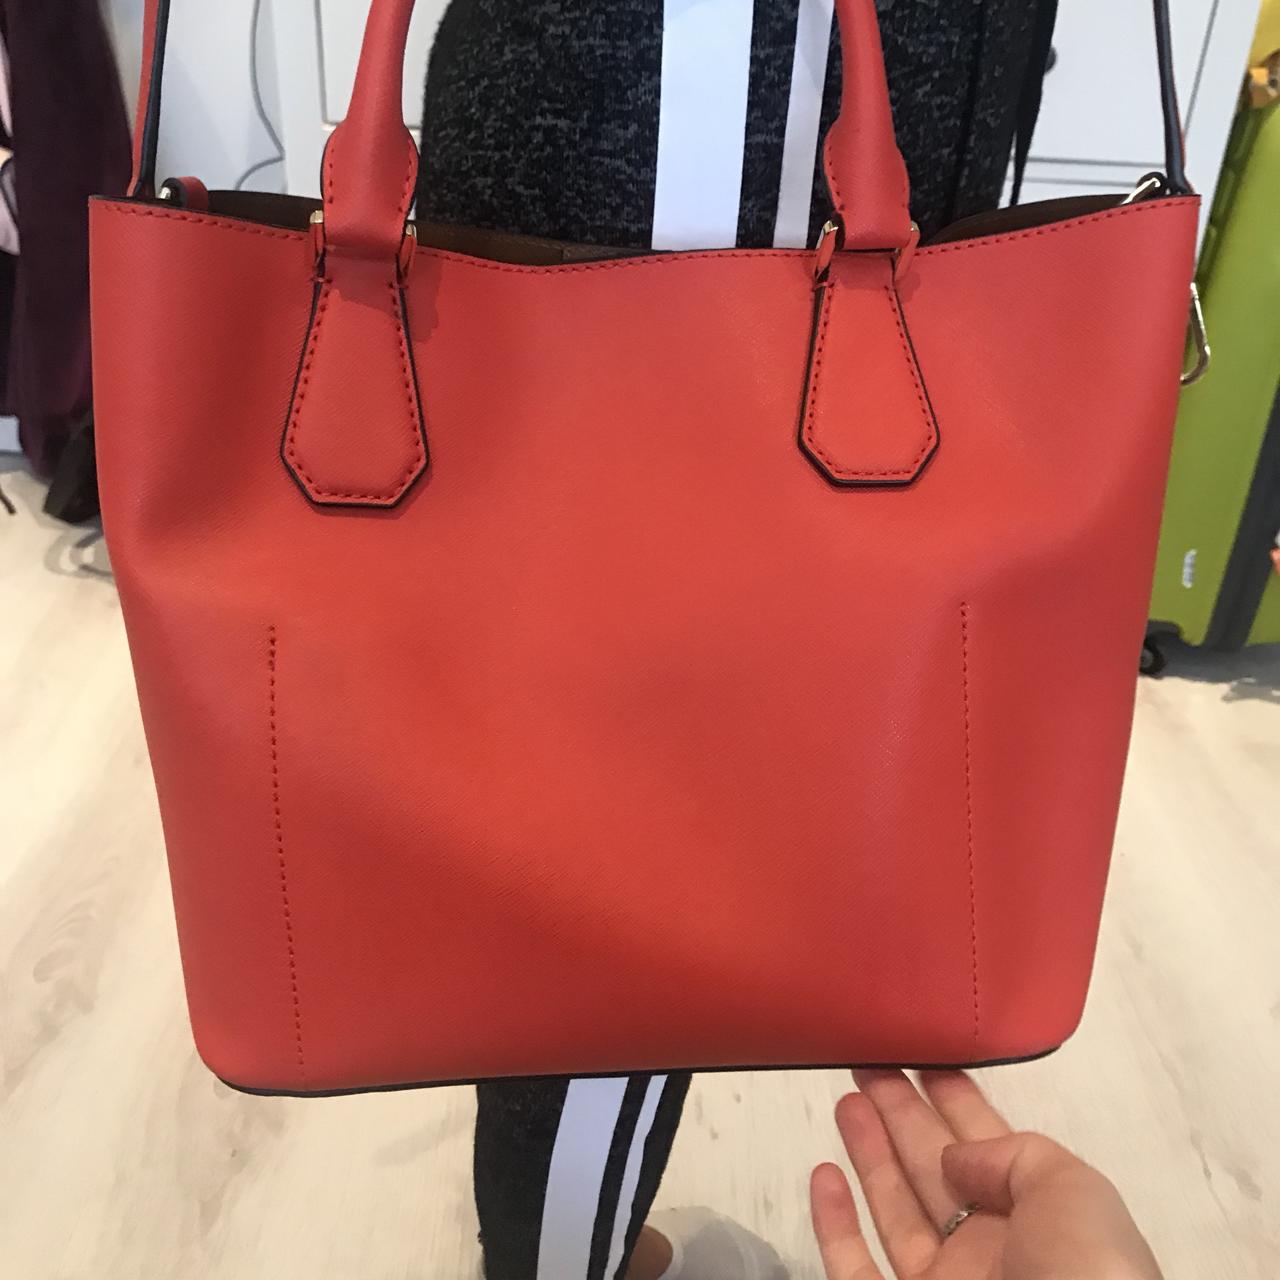 small red and white michael kors bag. undure if made - Depop